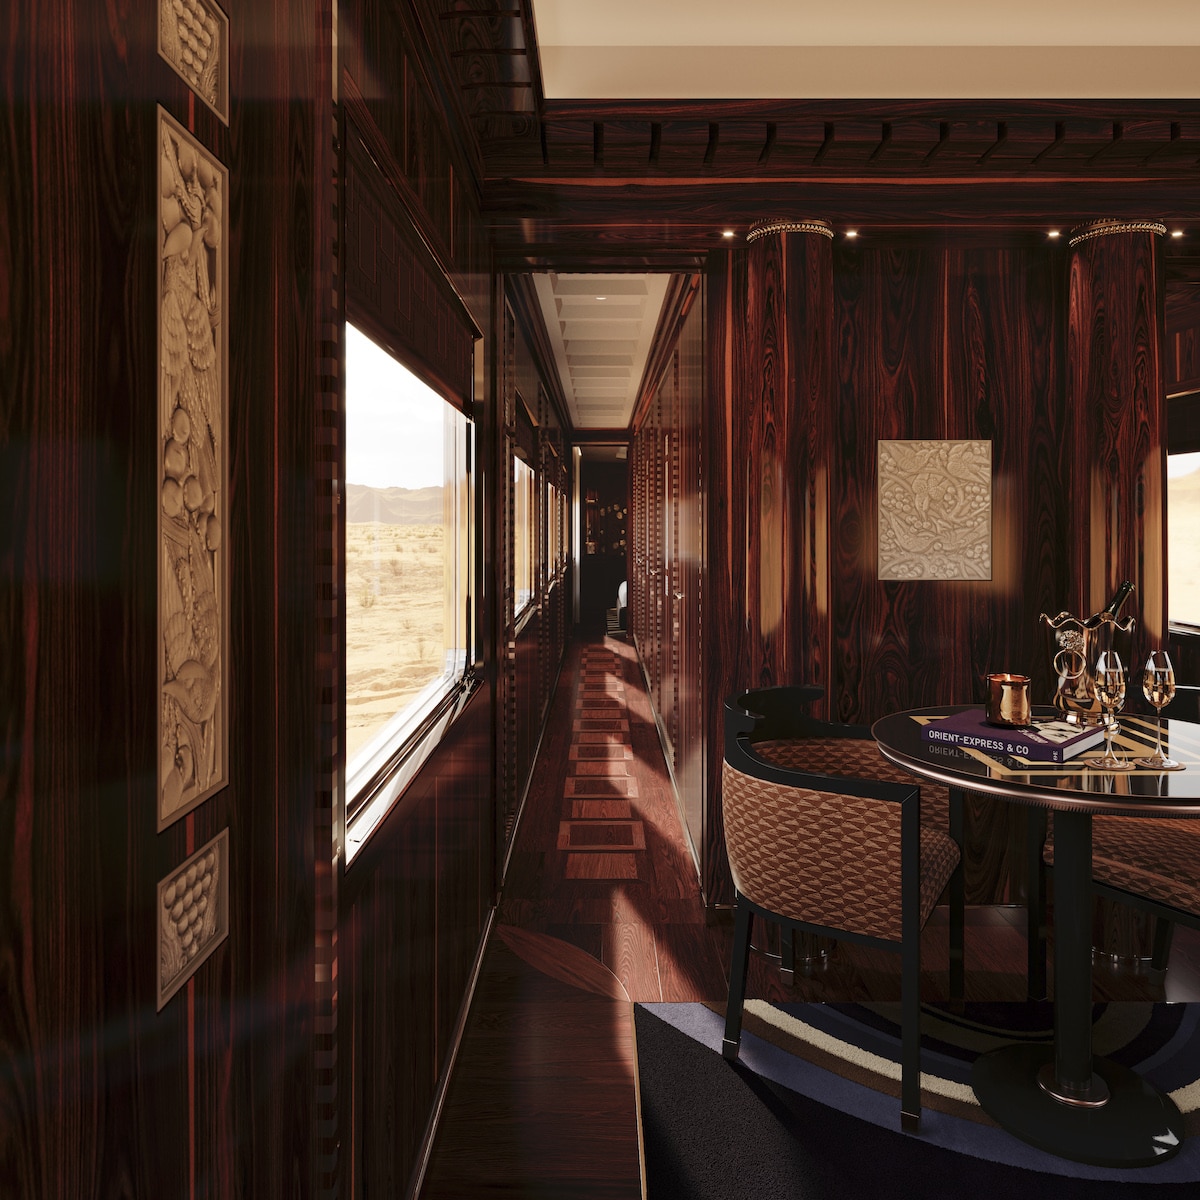 Accor Orient Express Presidential Suite